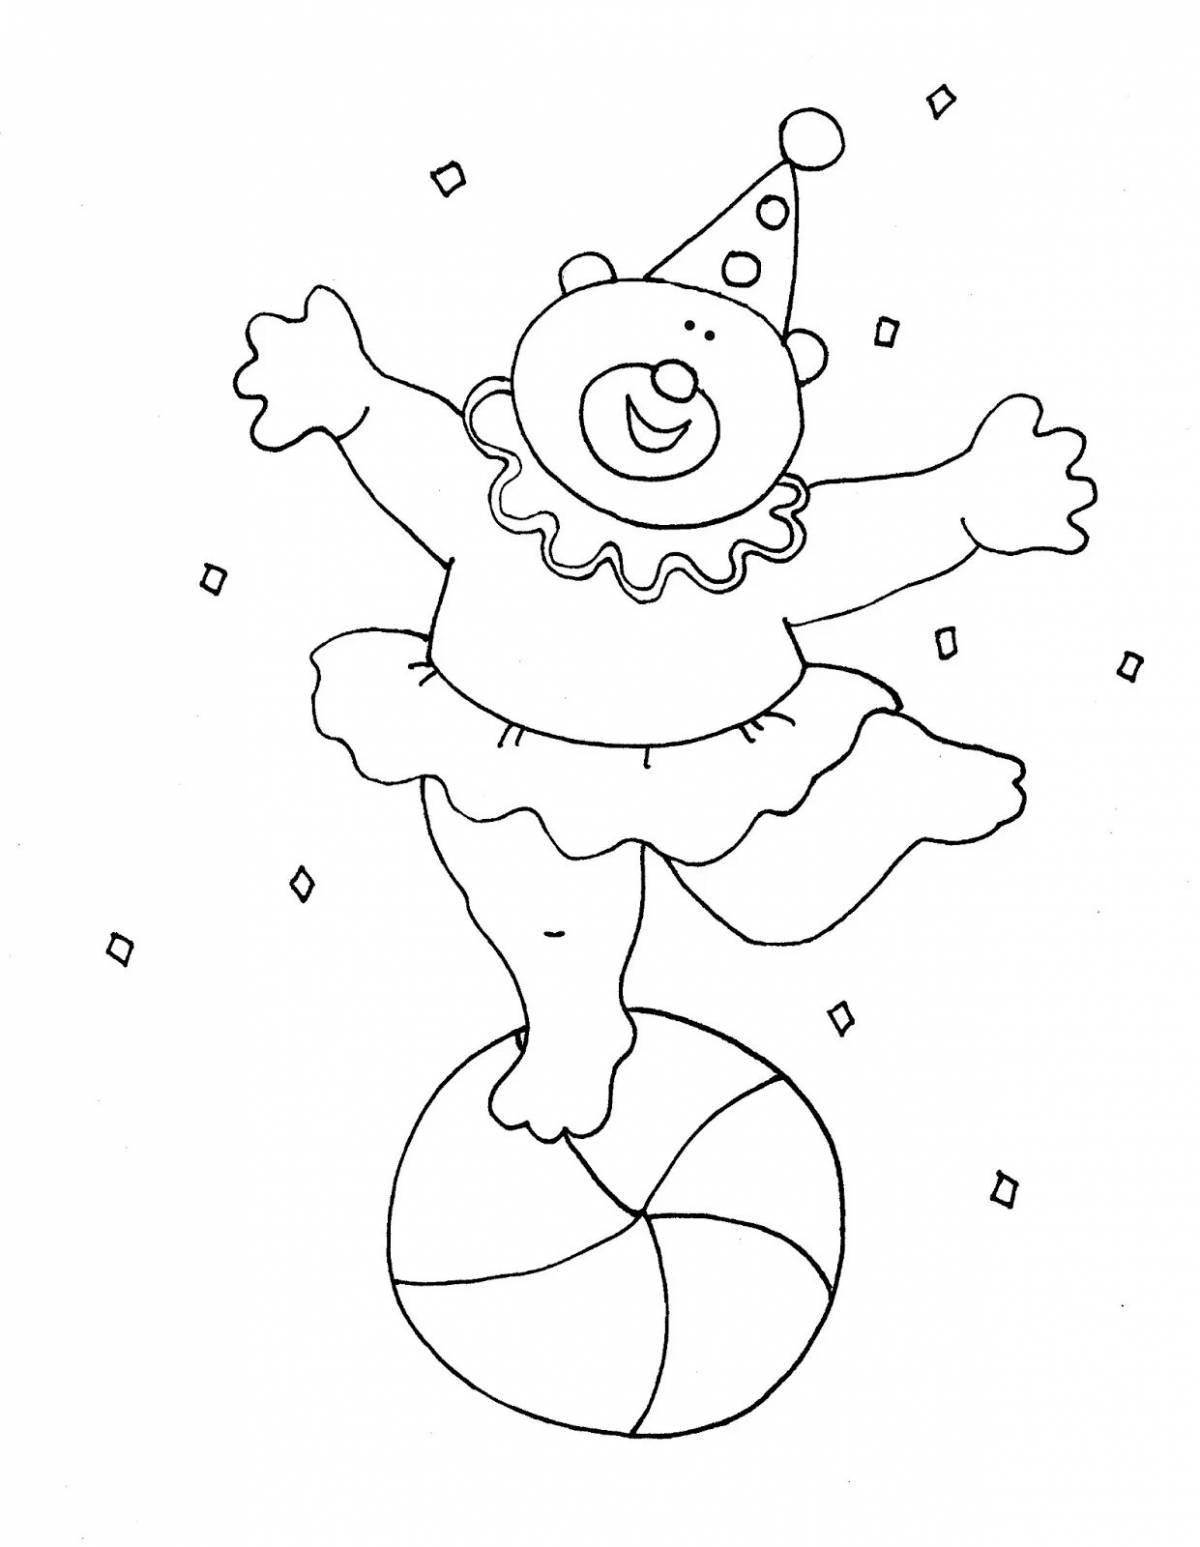 A fun circus coloring book for the little ones